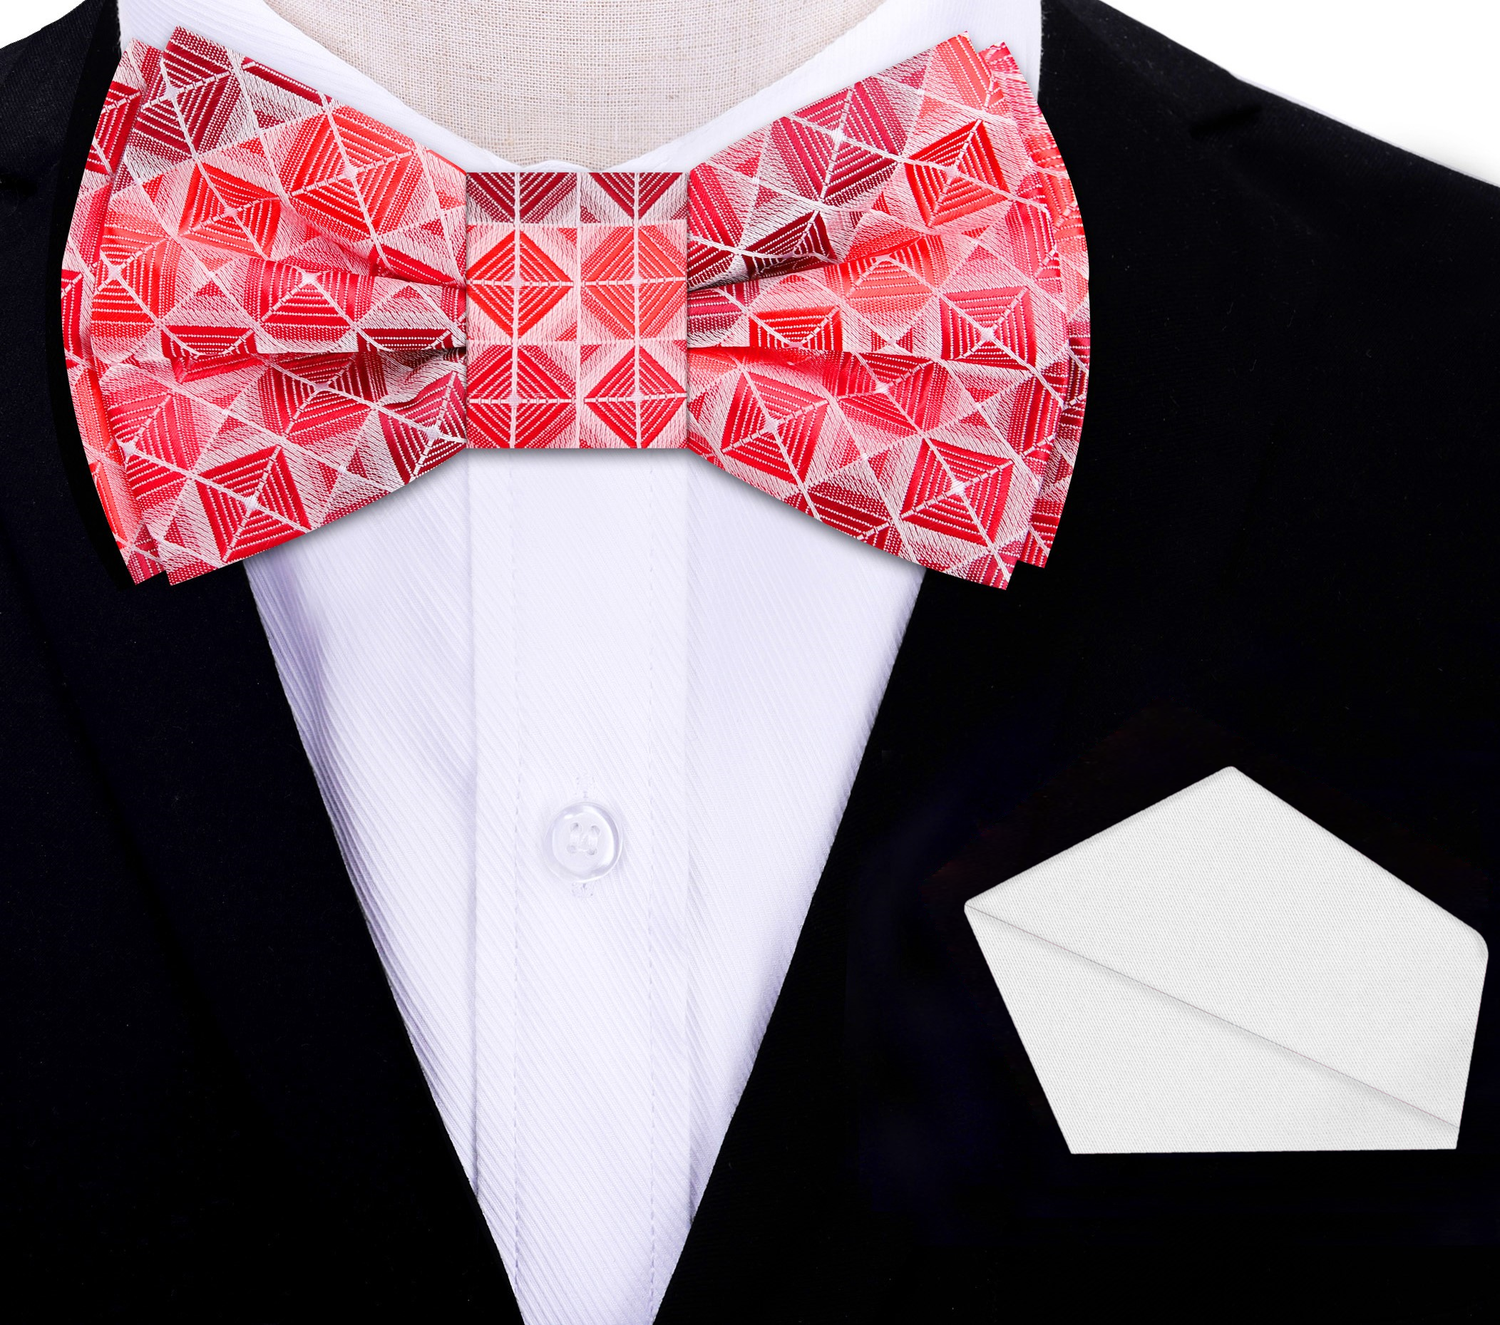 Shades of Red Geometric Bow Tie and White Square on Suit